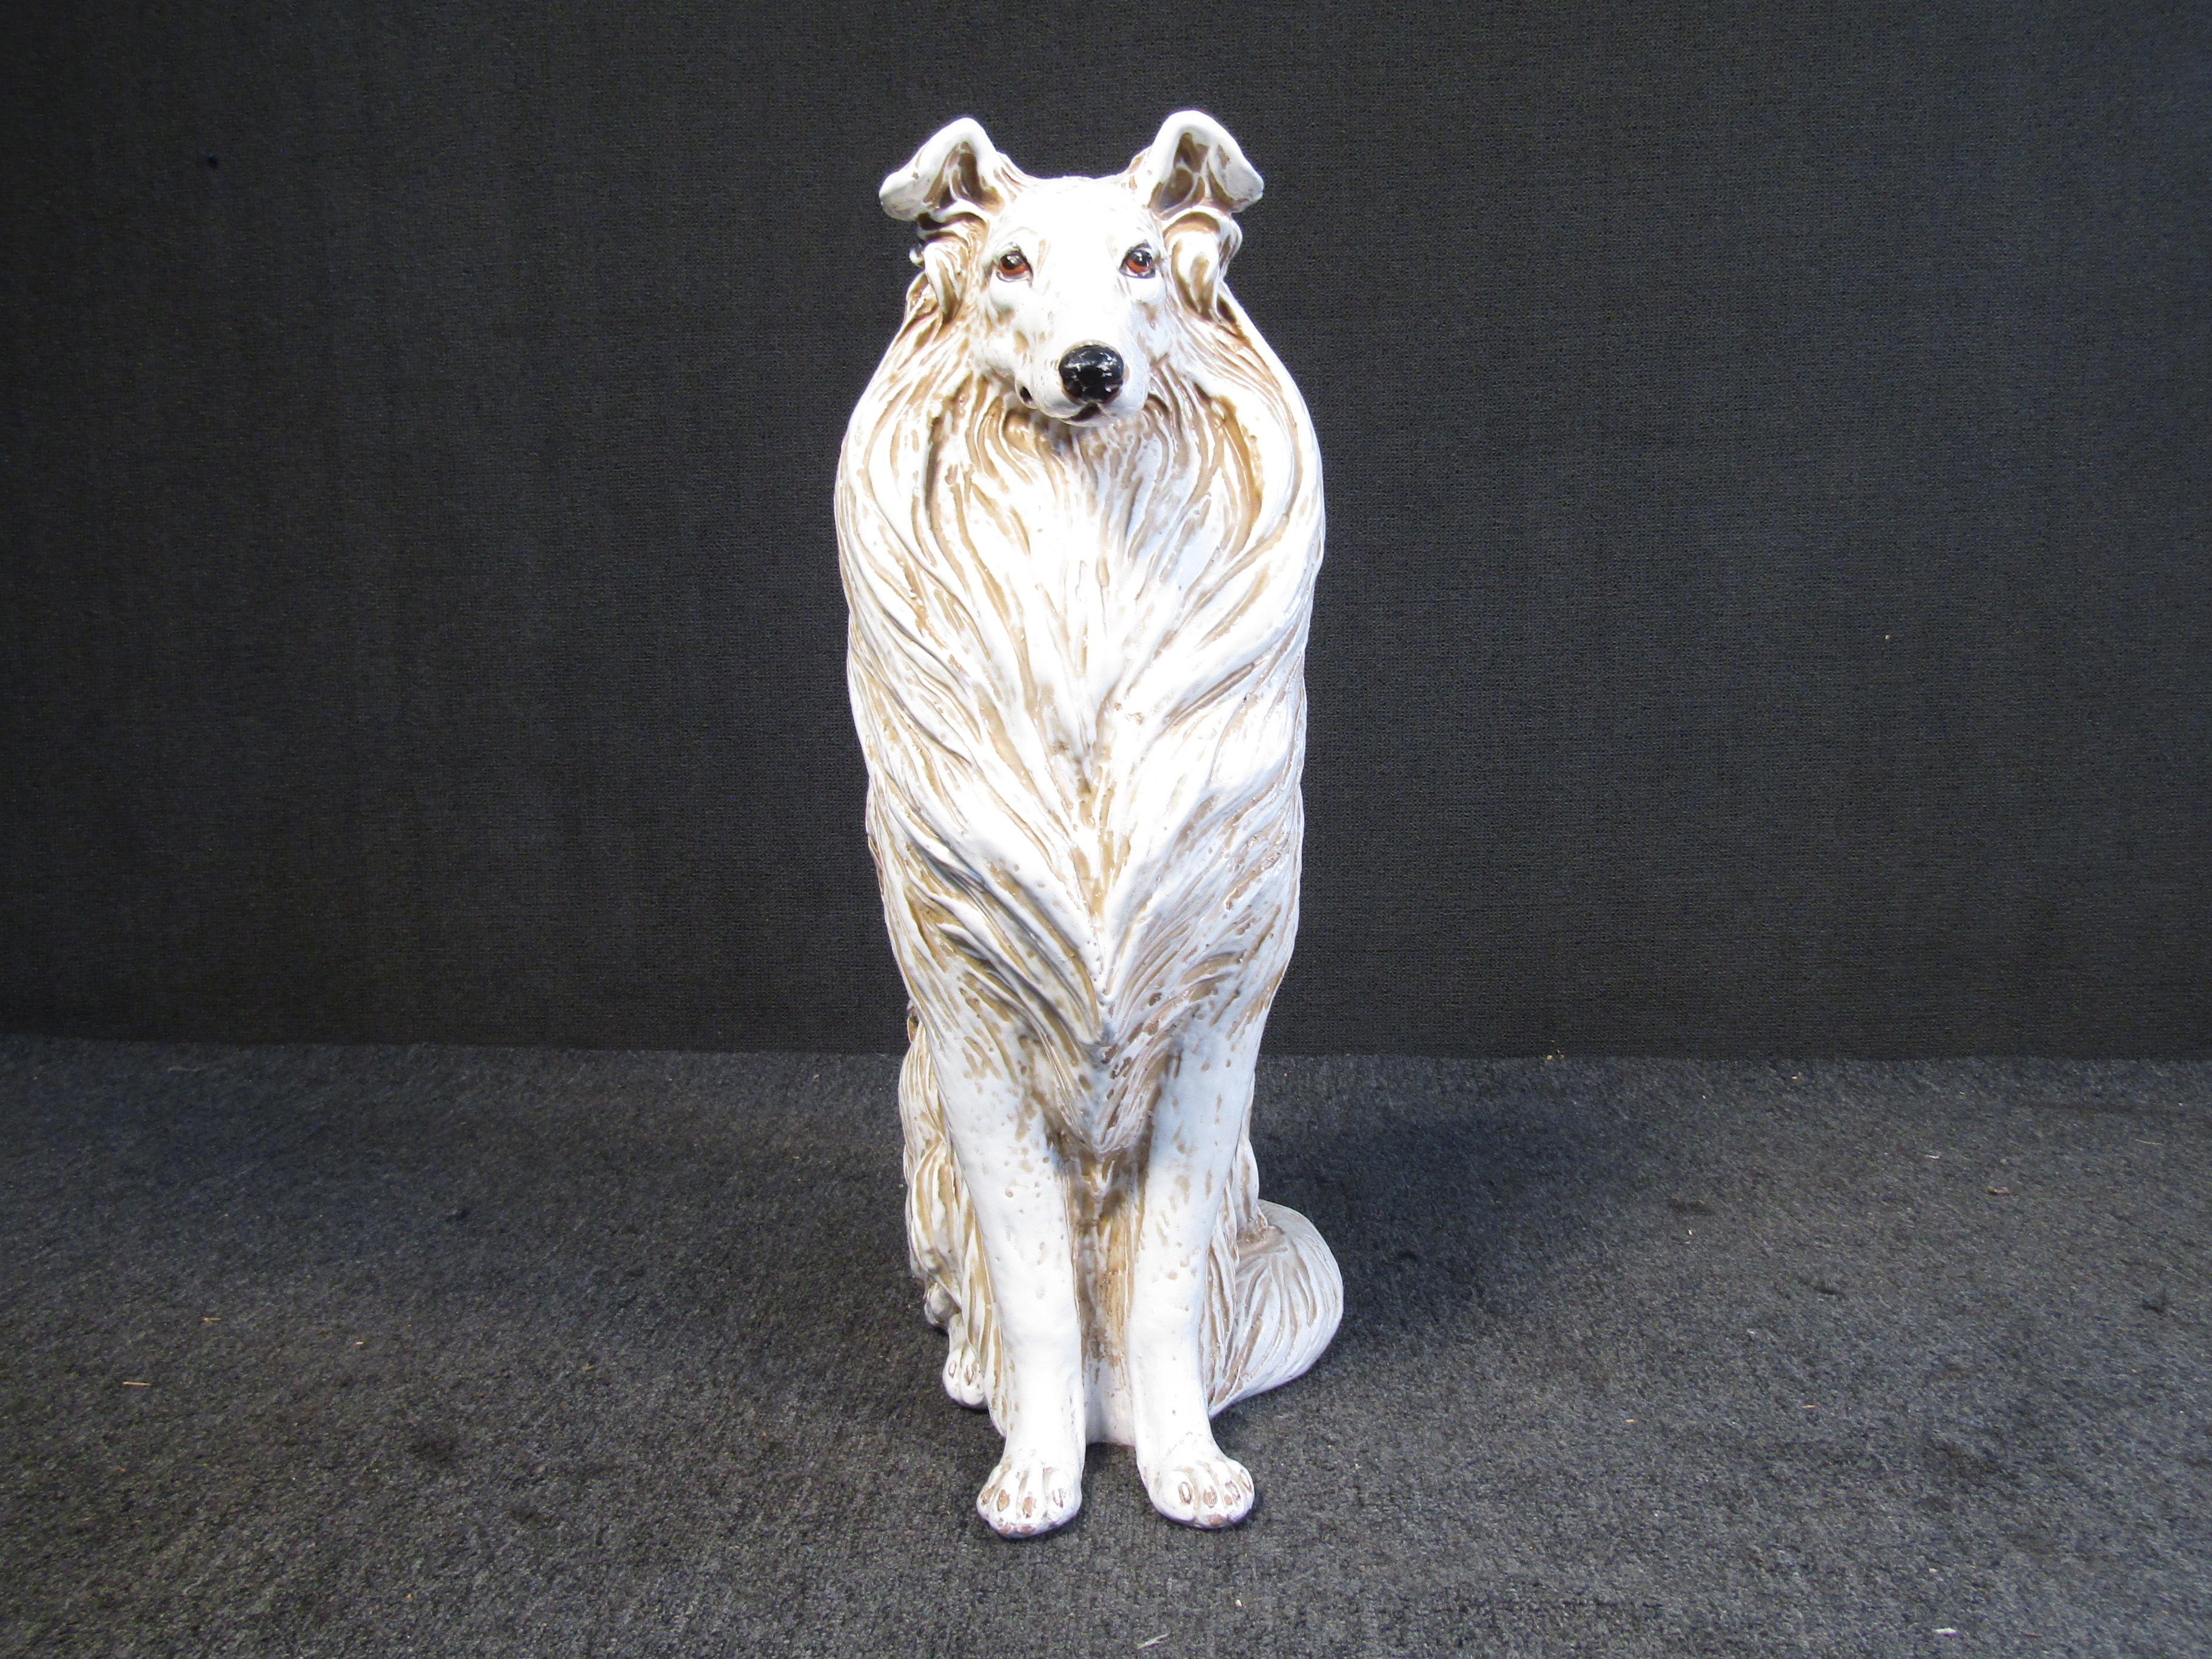 This vintage sculpture features a life-sized dog with beautiful lifelike details. Please confirm item location with seller (NY/NJ).